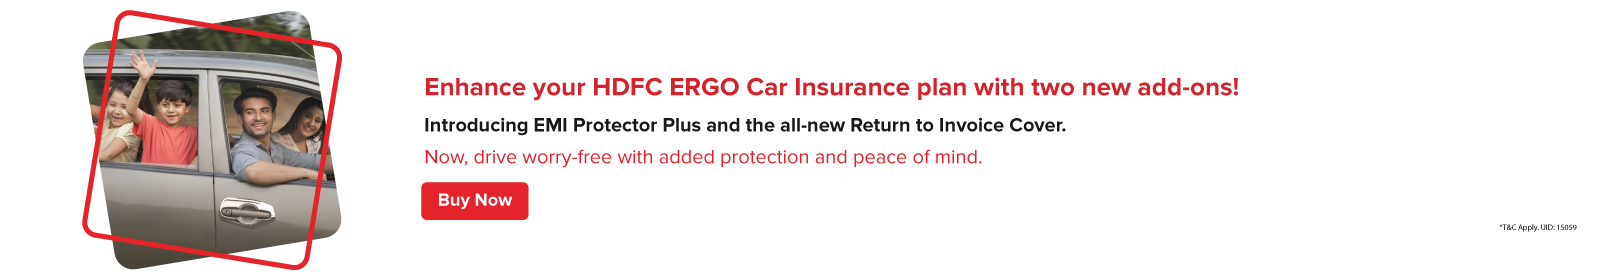 HDFC ERGO Car Insurance Plan with two New add-ons